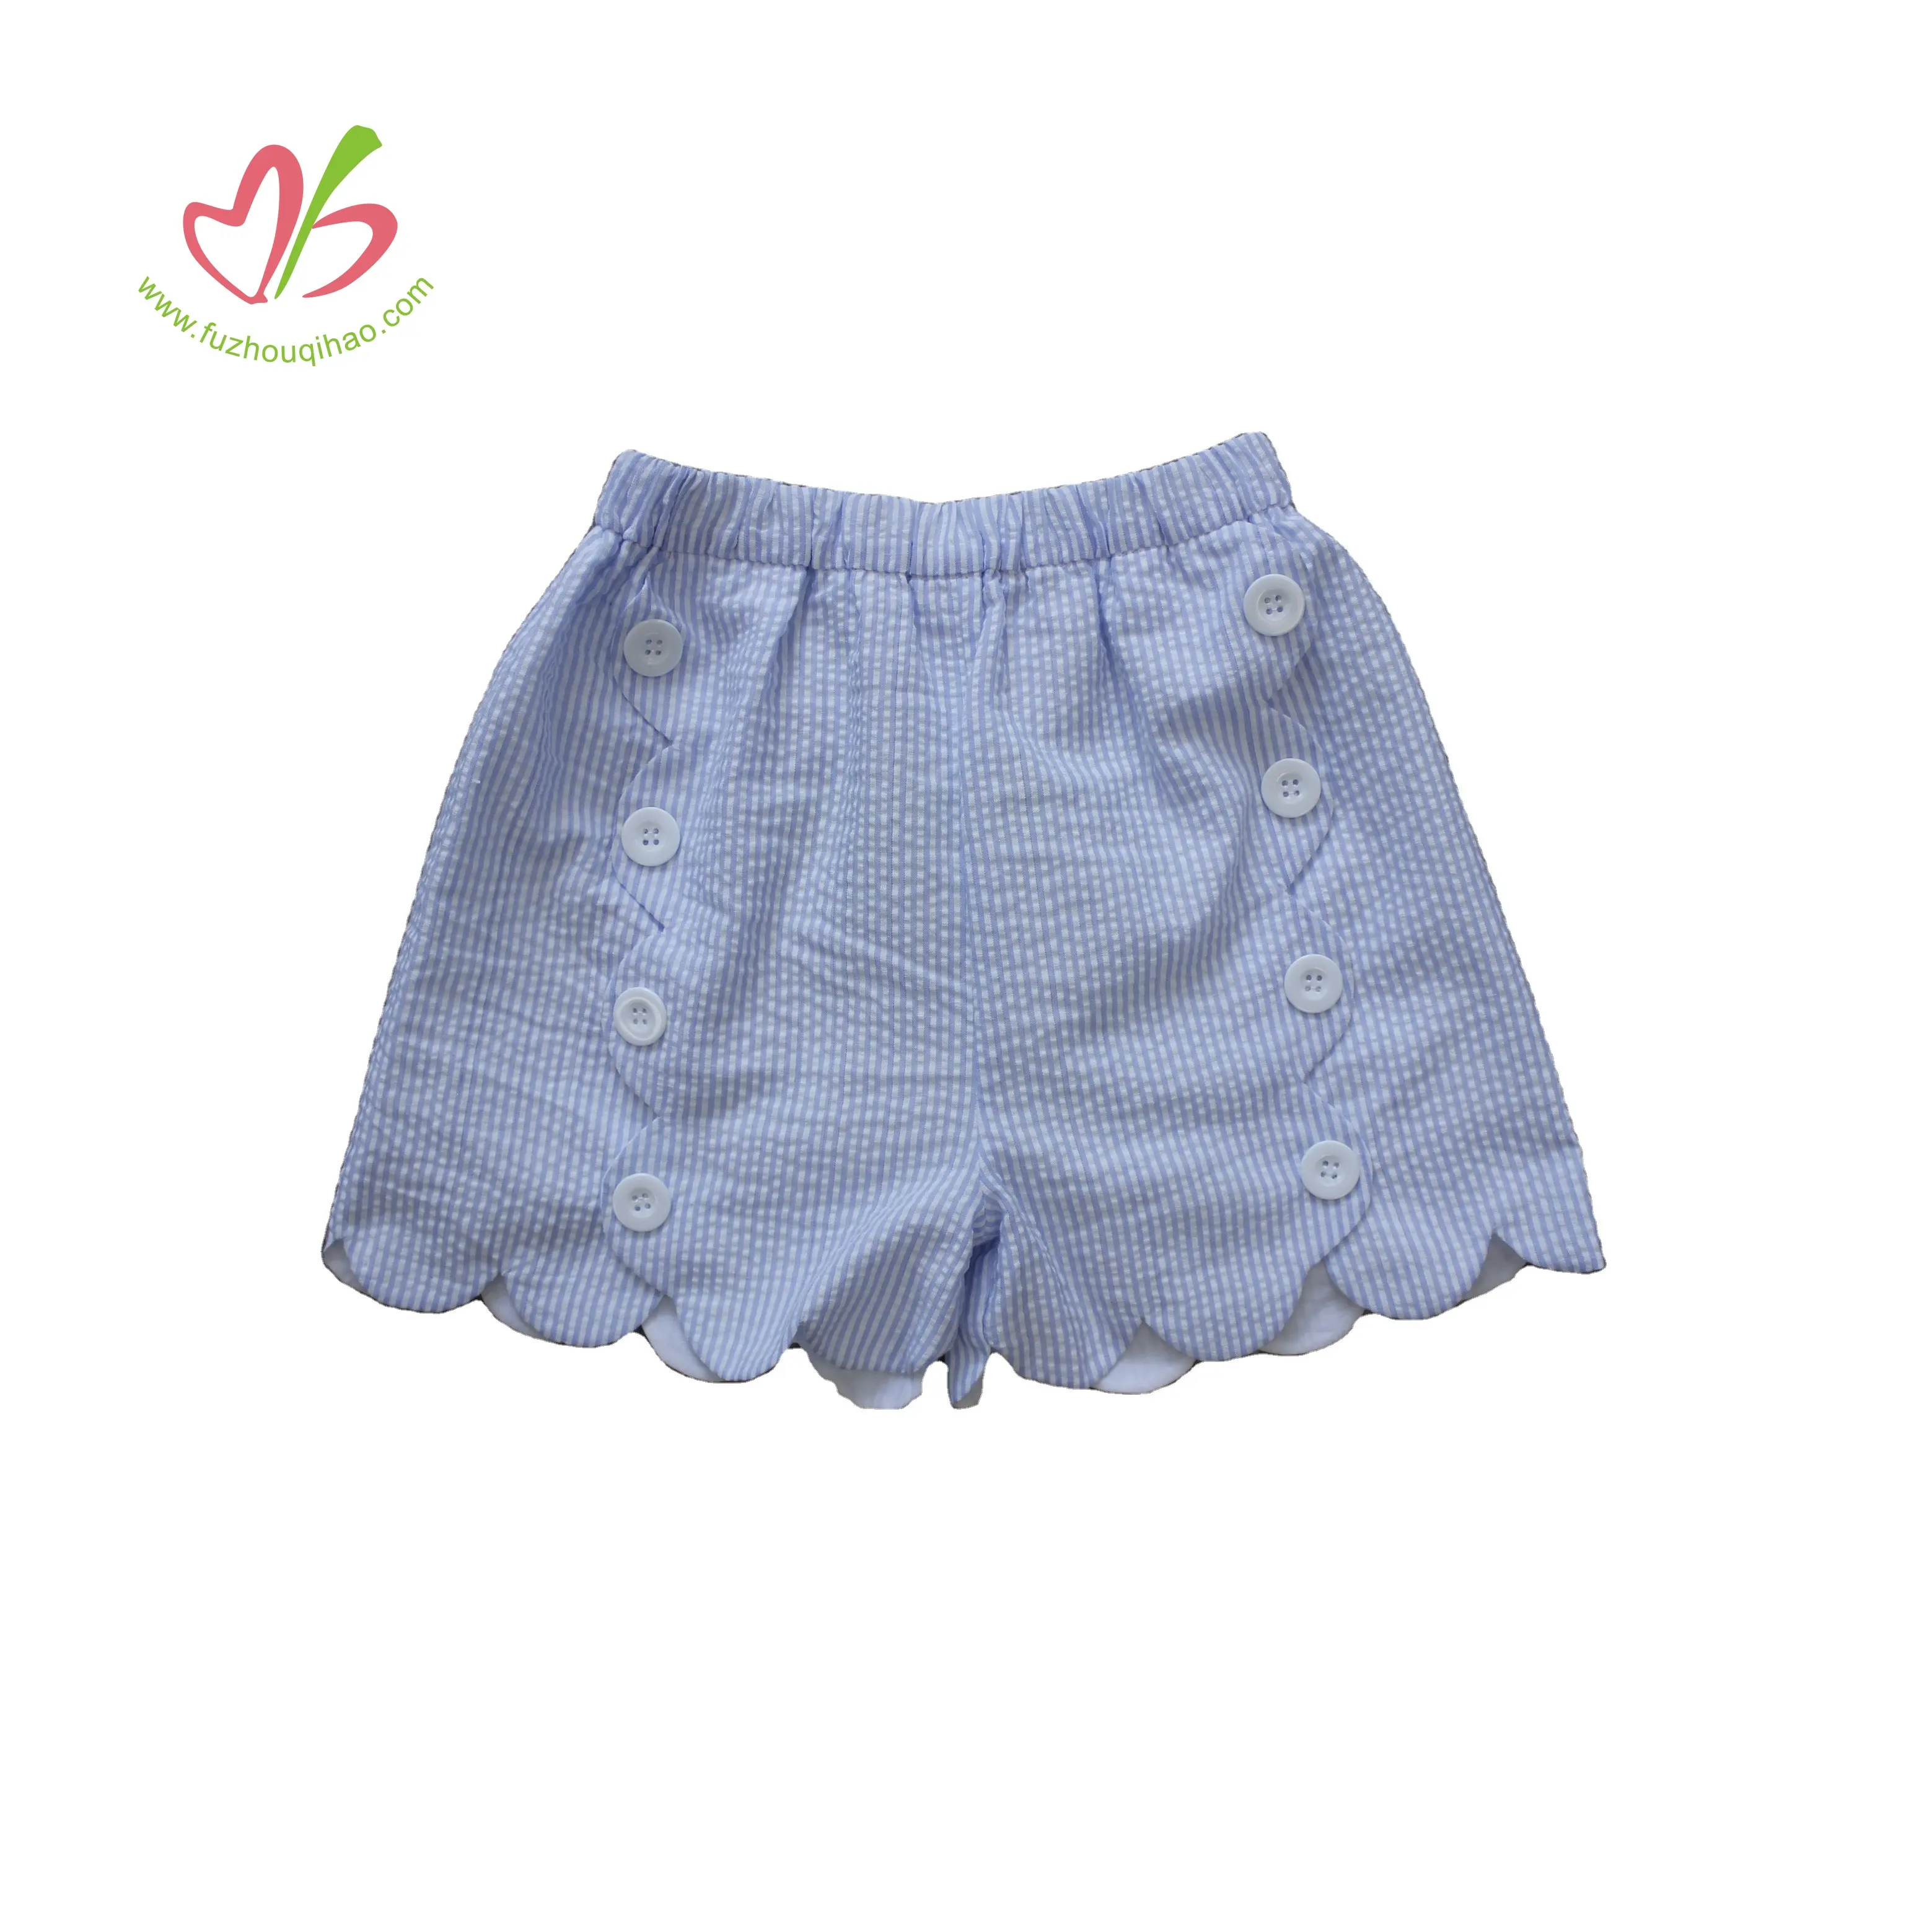 Fashion Boutique Style Kids Girl's Short Pants Blue Pink Seersucker Lined Girls' Scalloped Shorts